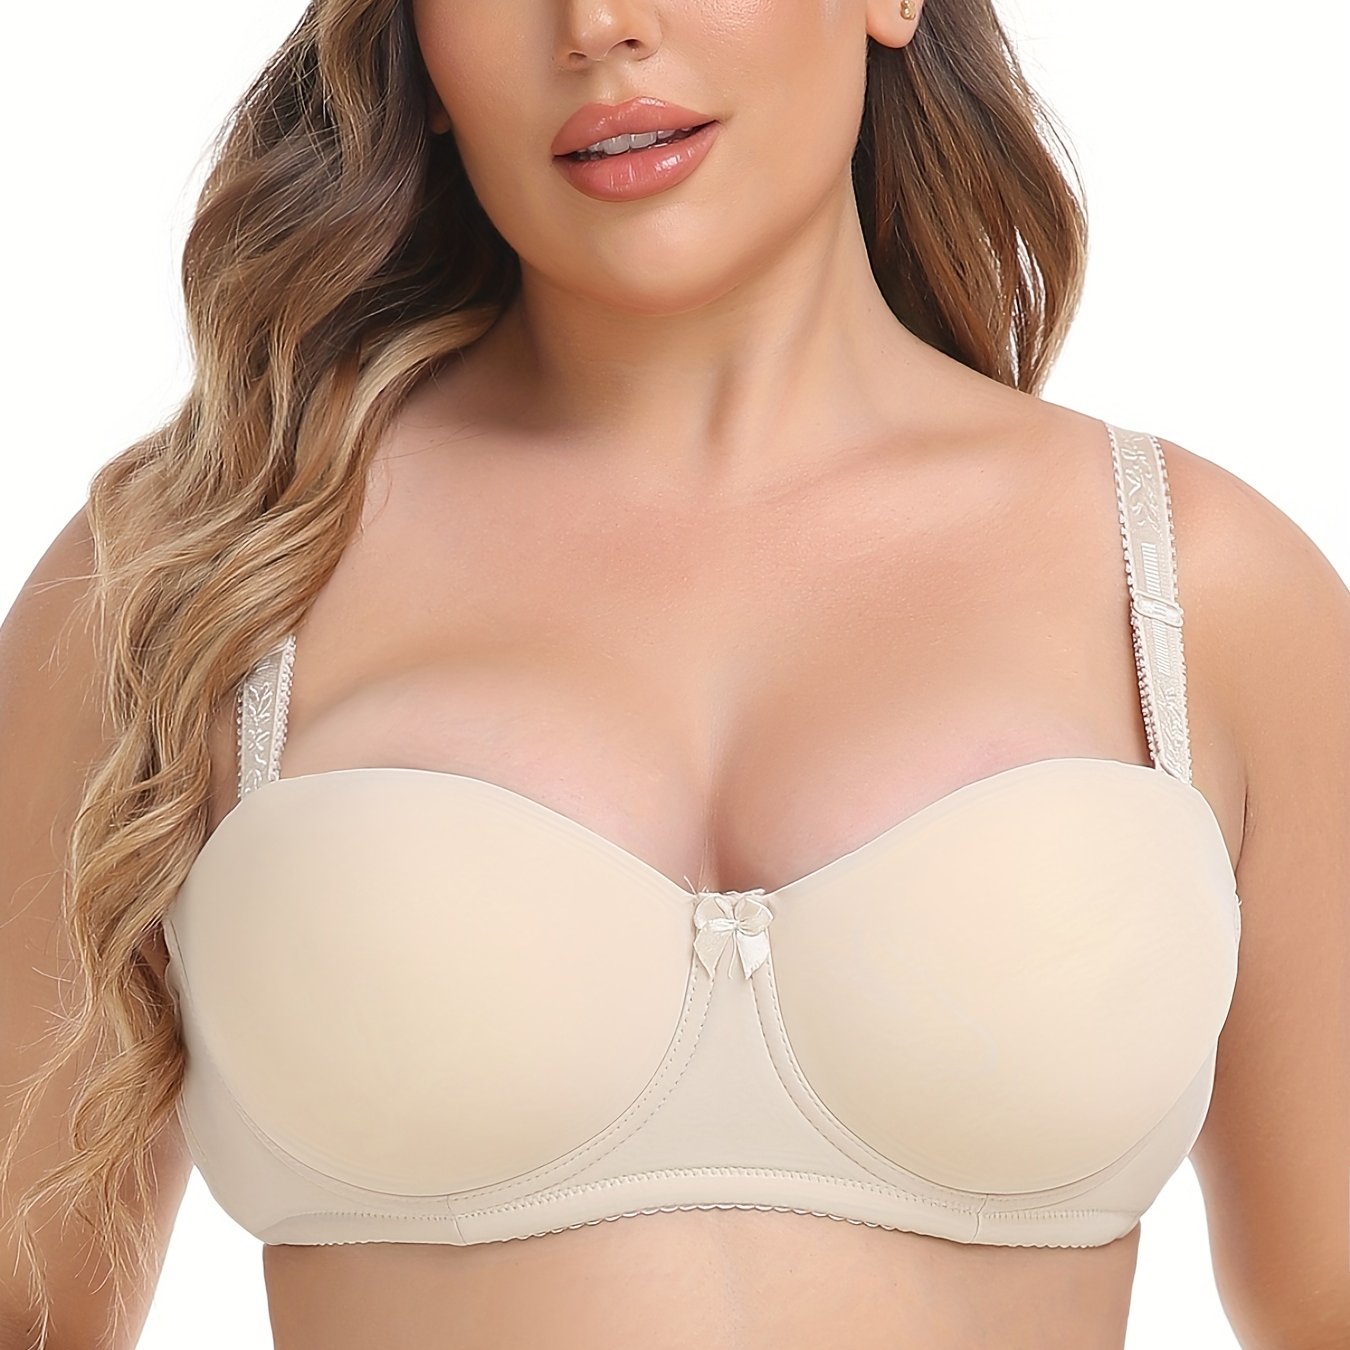 Sexy Bras For Women Plus Size Bra Push Up Lingerie Gather Seamless Wire  Free Bralette C D E Cup Strappy Underwear #D From Jingju, $20.97